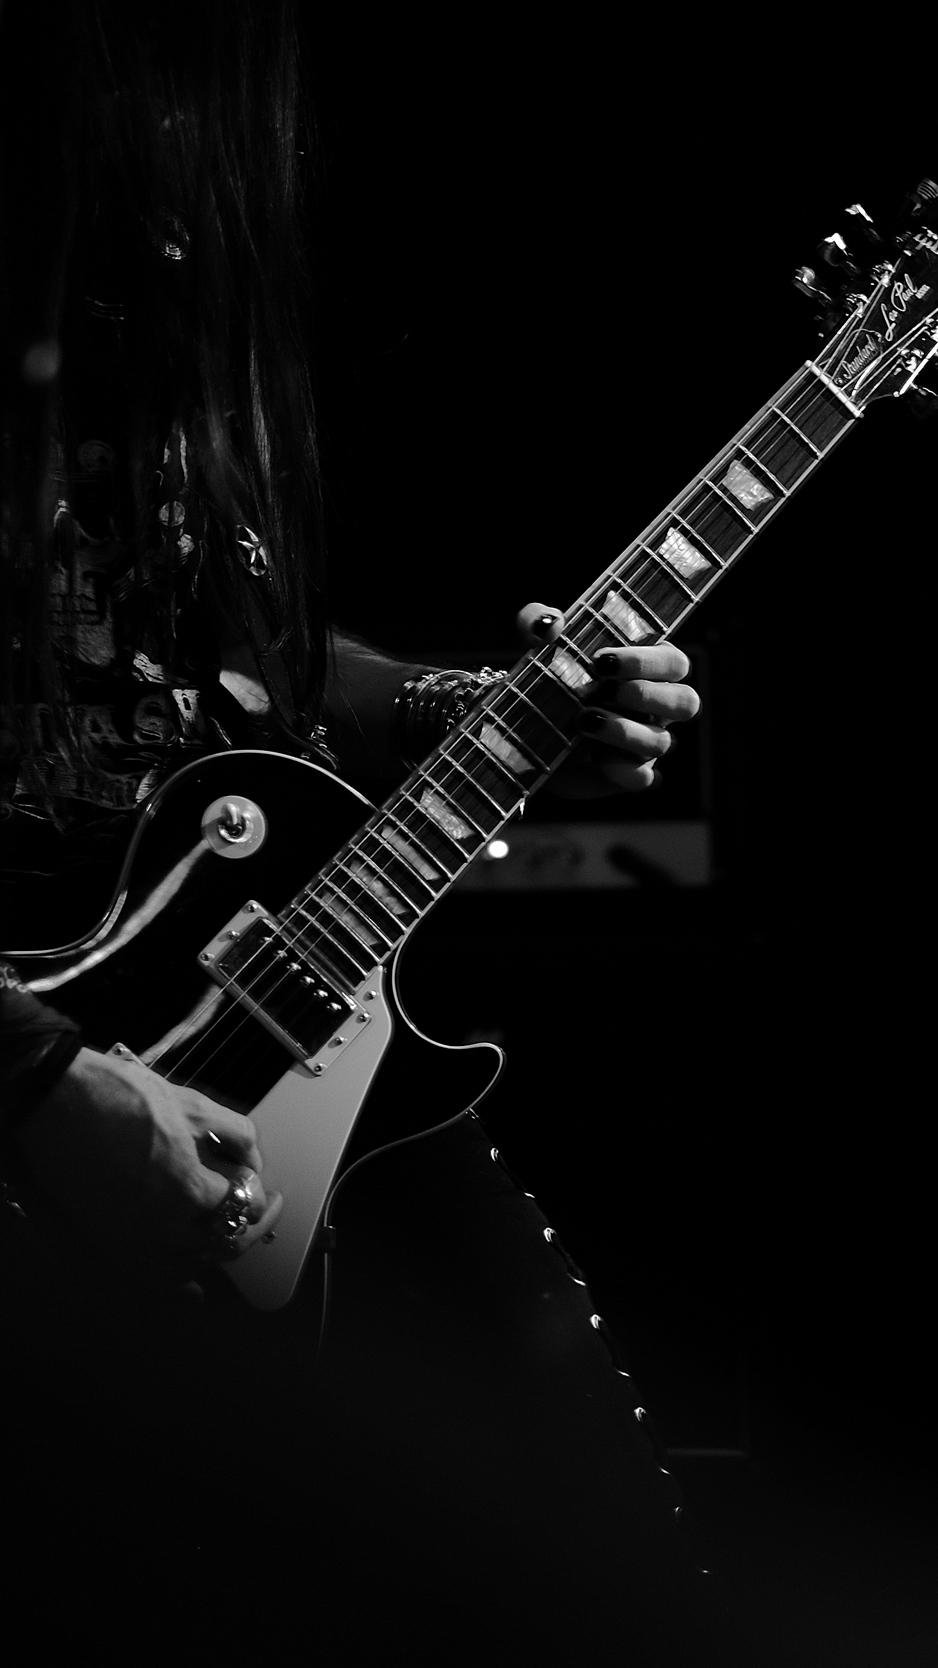 Electric guitar black and white Wallpaper Download | MobCup